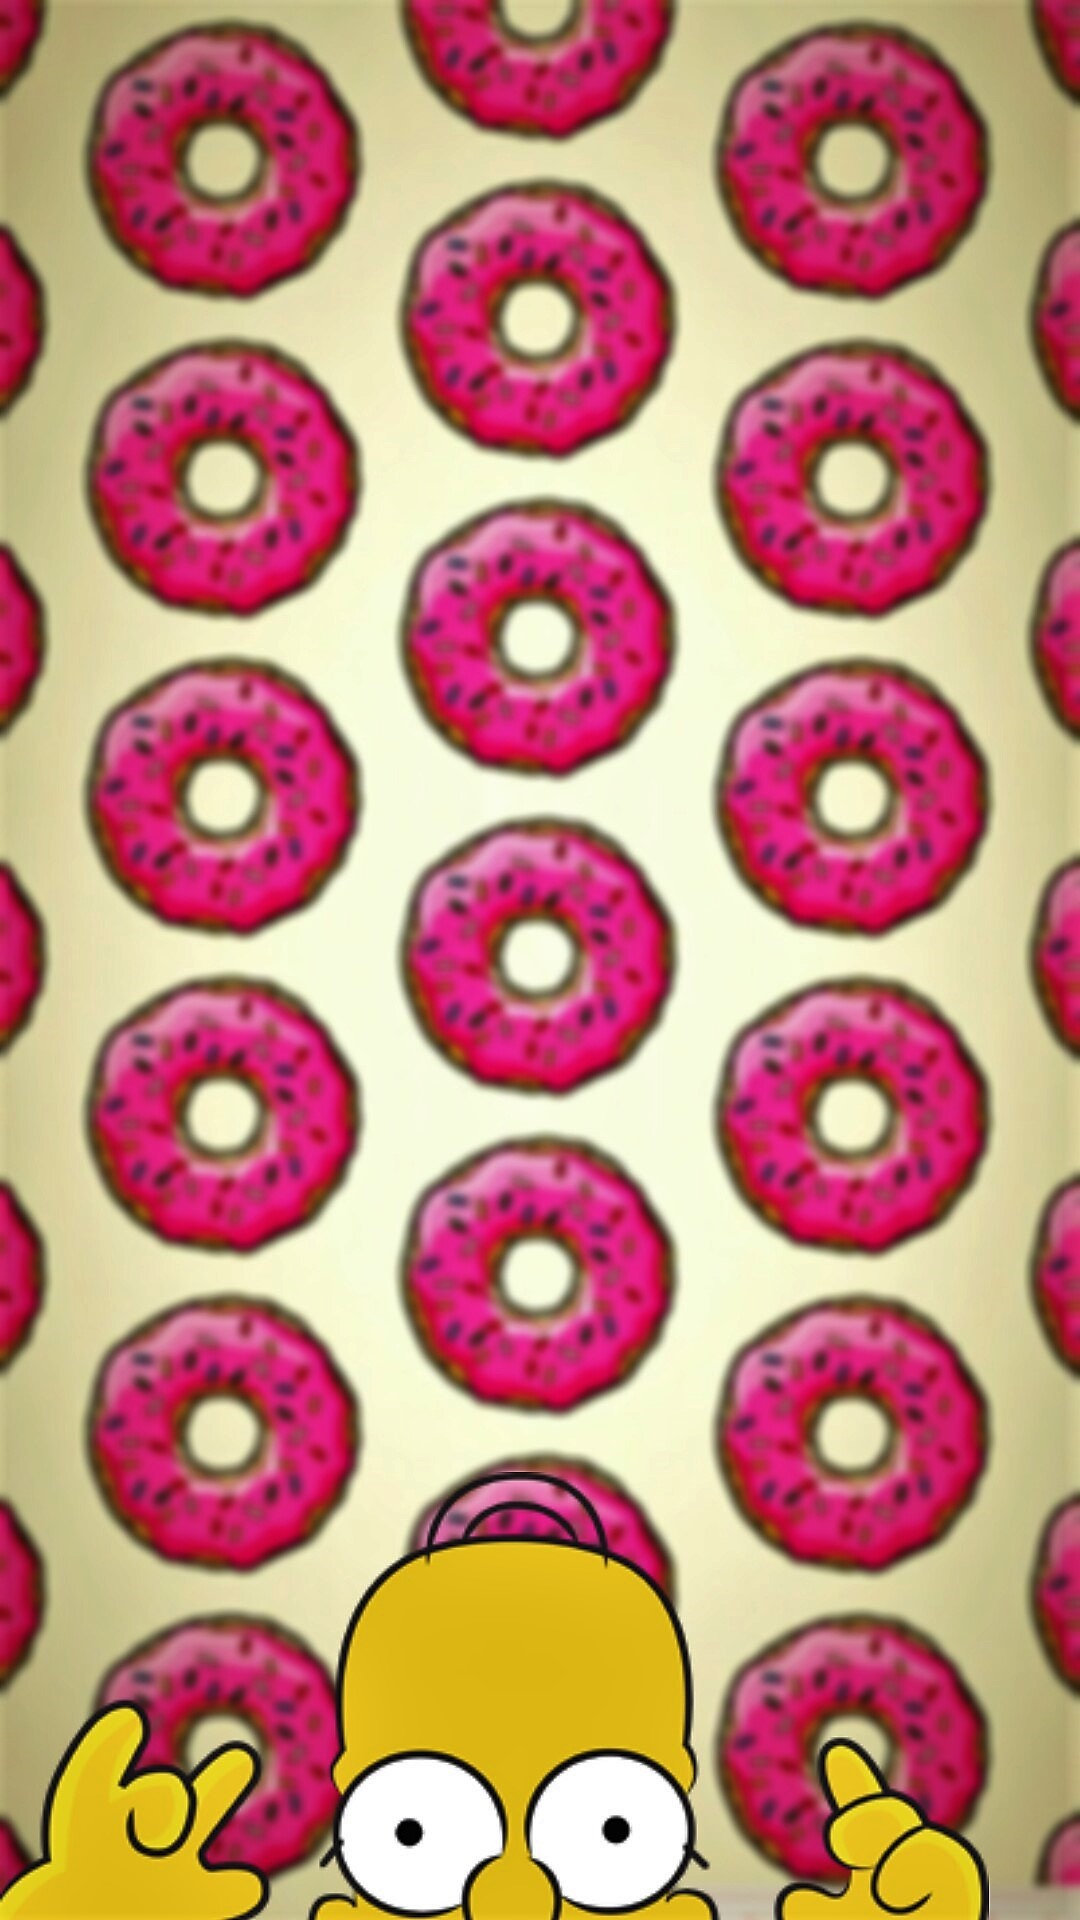 1080x1920 Homero donuts - Tap to see more of the cutest cartoon characters wallpapers!  - @